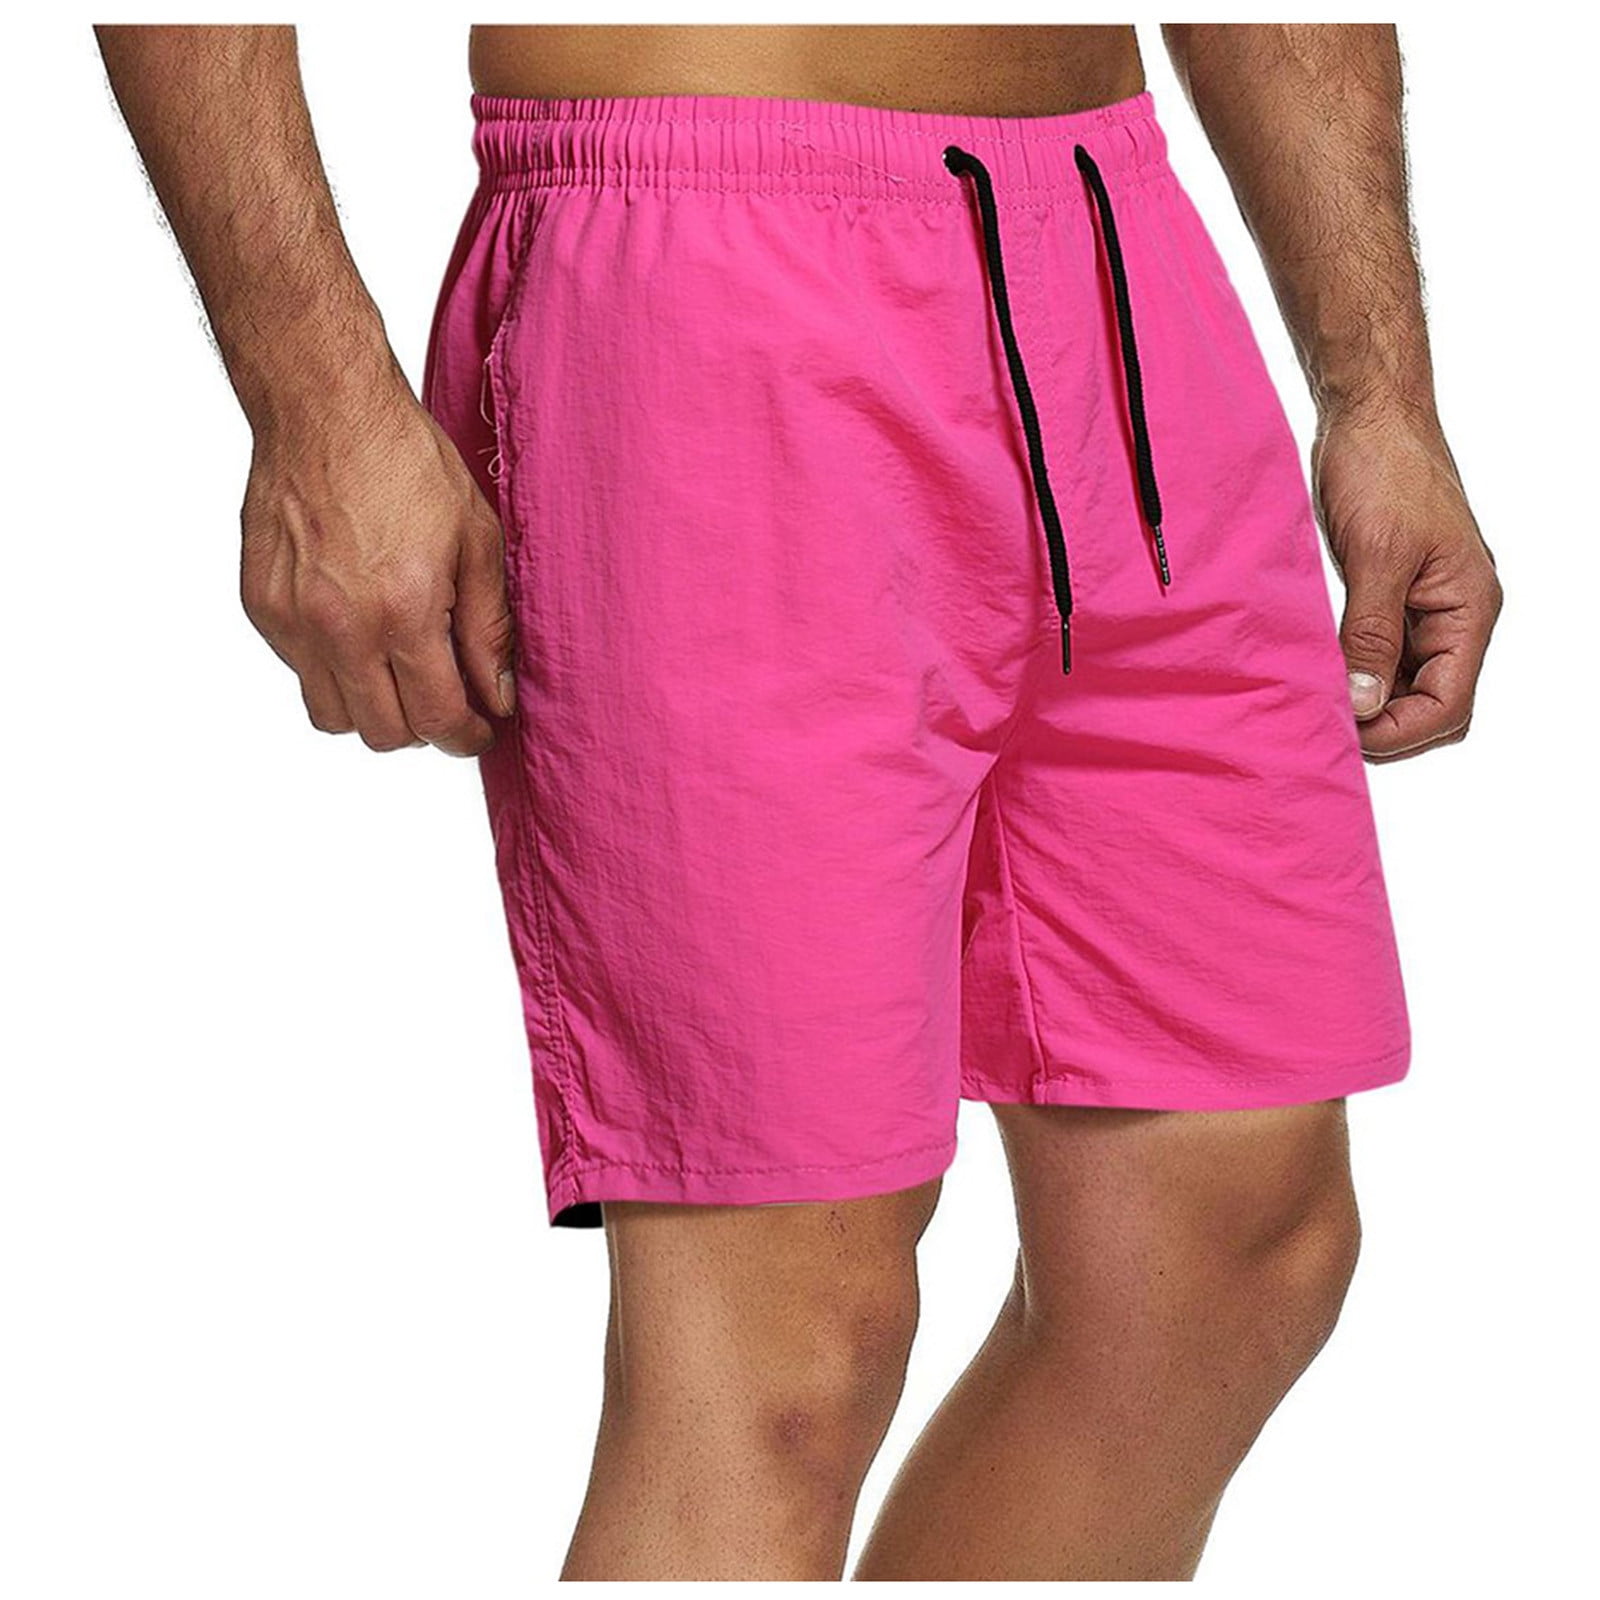 Black and Friday Deals Womens Clearance Viikei Men's Shorts Clearance ...